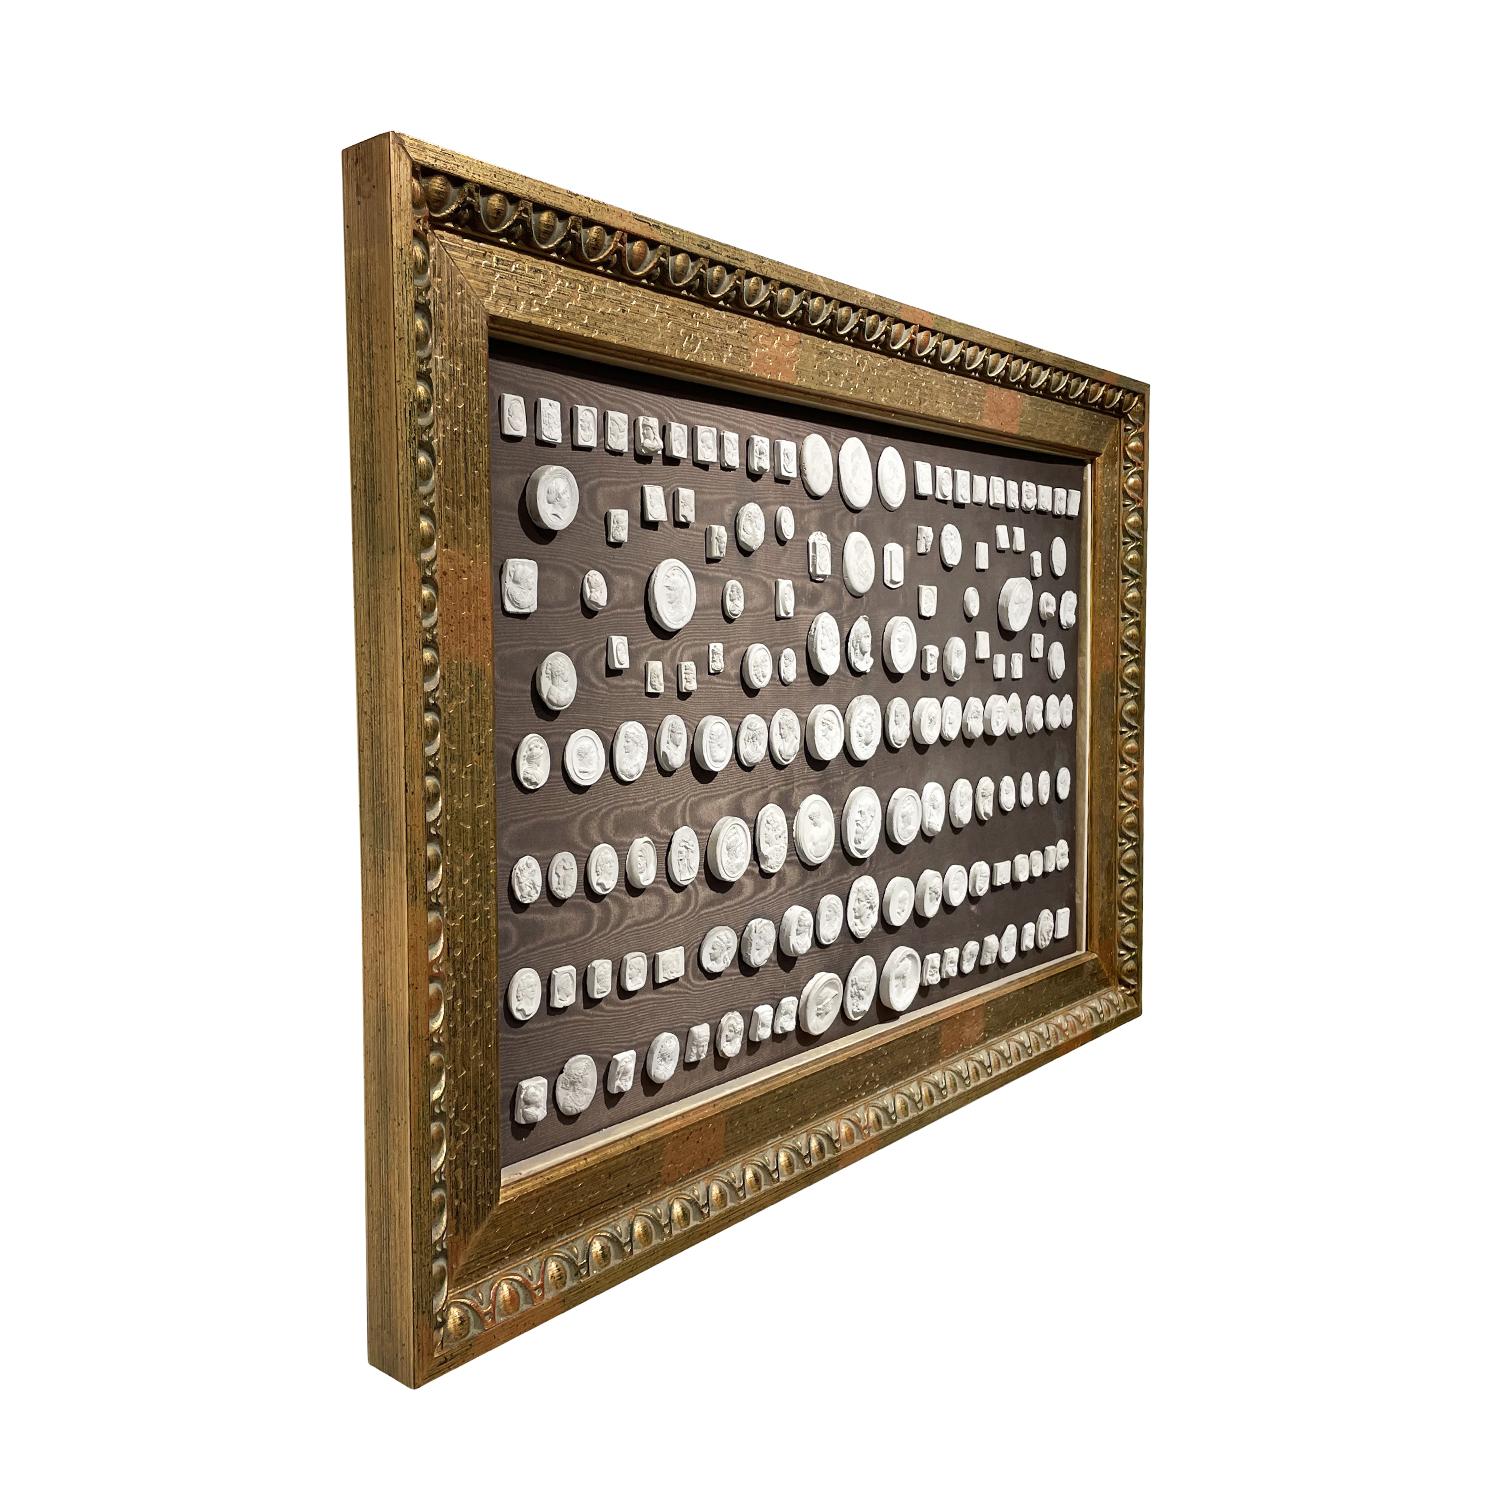 A vintage European gem collection of one hundred fourteen plaster casts, in good condition. Each of the casts is handcrafted, decoratively grouped and framed on a wooden frame. The form and sizes of each varies. Not recommended for exterior use.